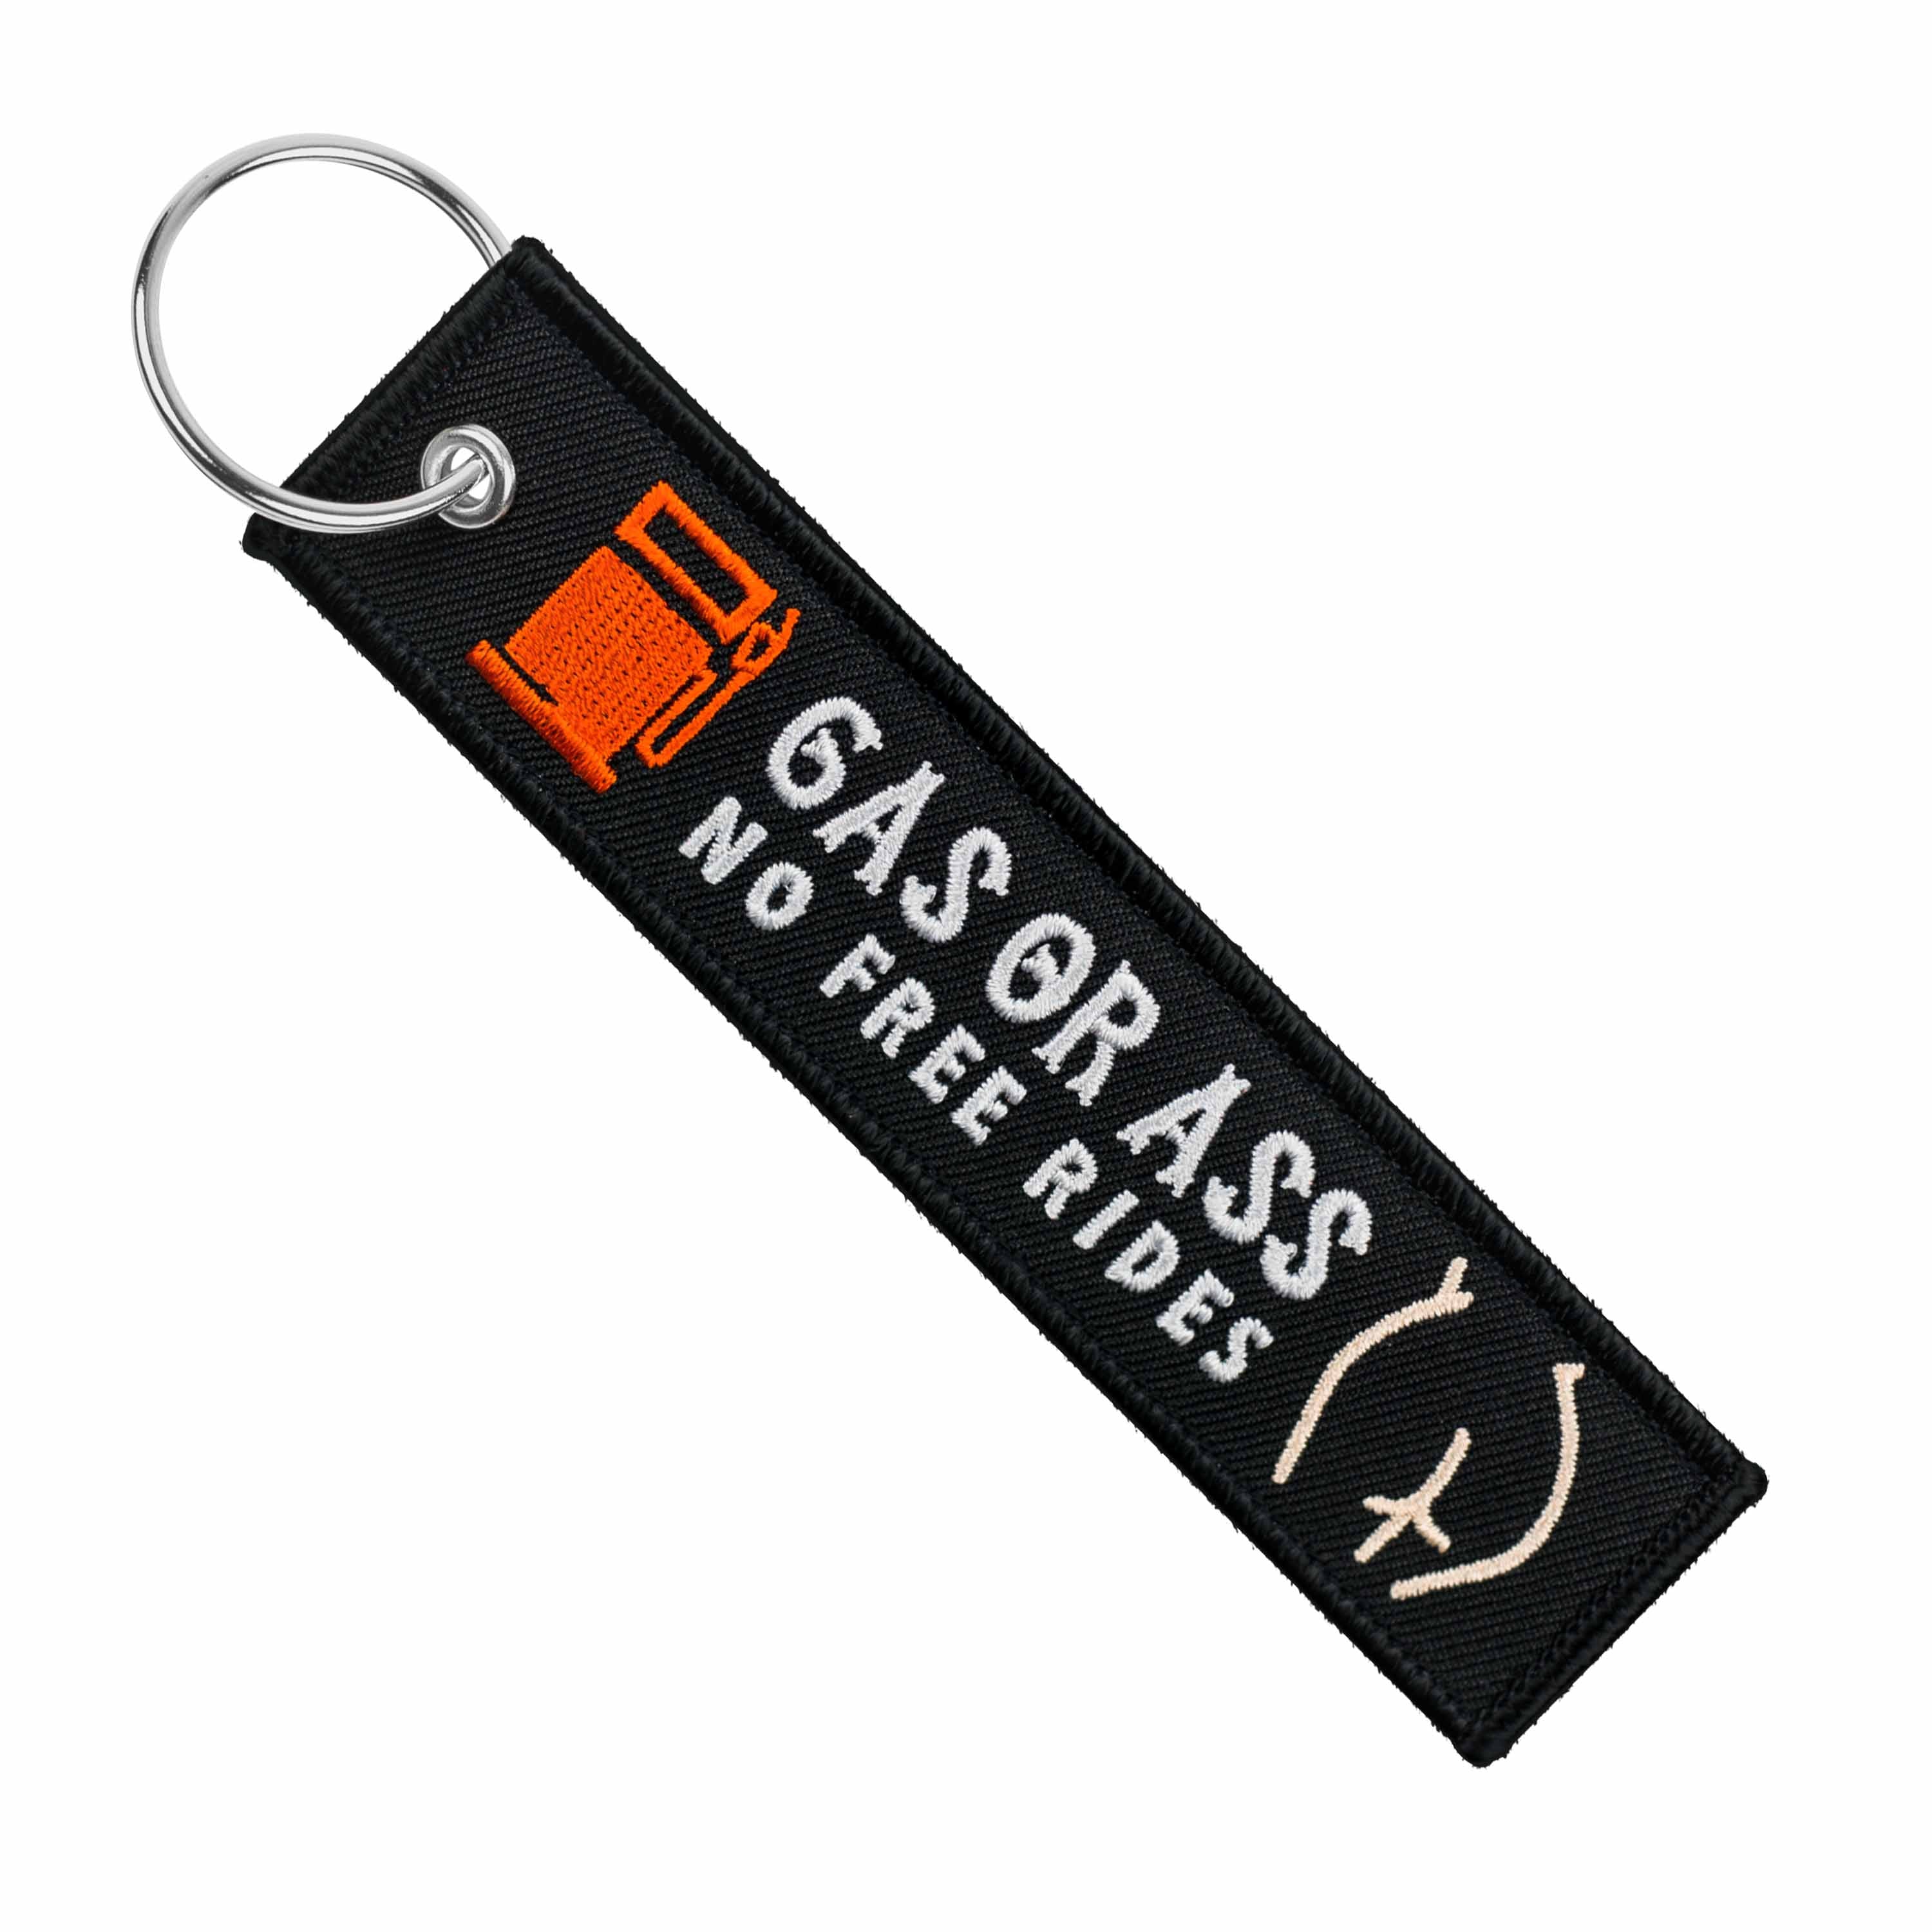 Gas or Ass - Motorcycle Keychain - Moto Loot